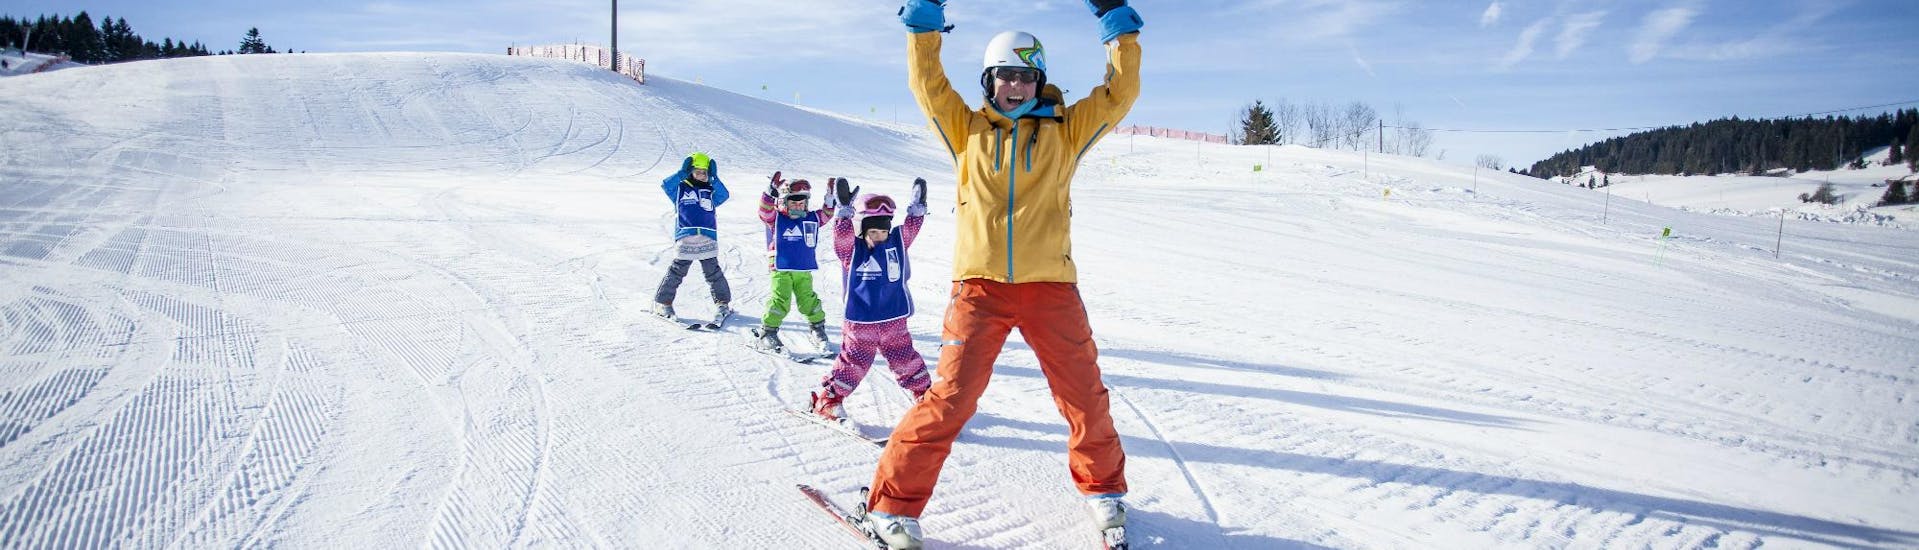 Kids Ski Lessons (5-15 years) in Sinswang - All Levels.